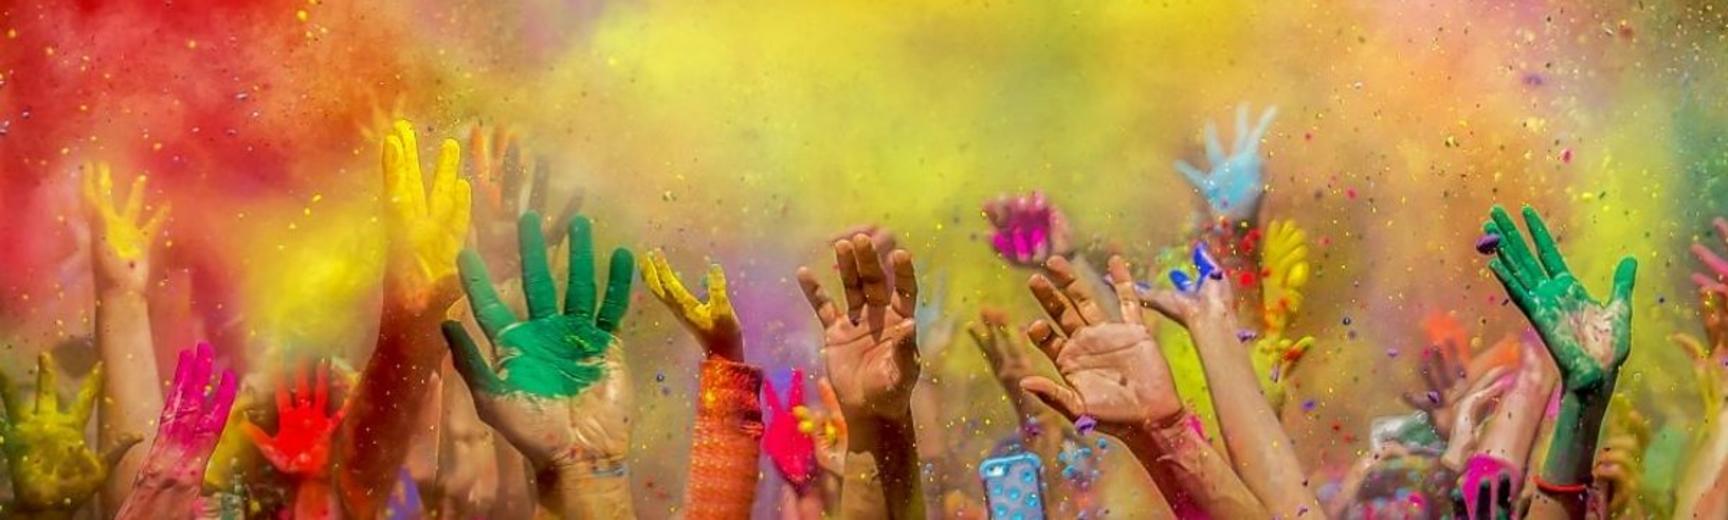 Colourful powders fill the air, and hands covered in powder and paint reach upwards, as part of Holi celebrations